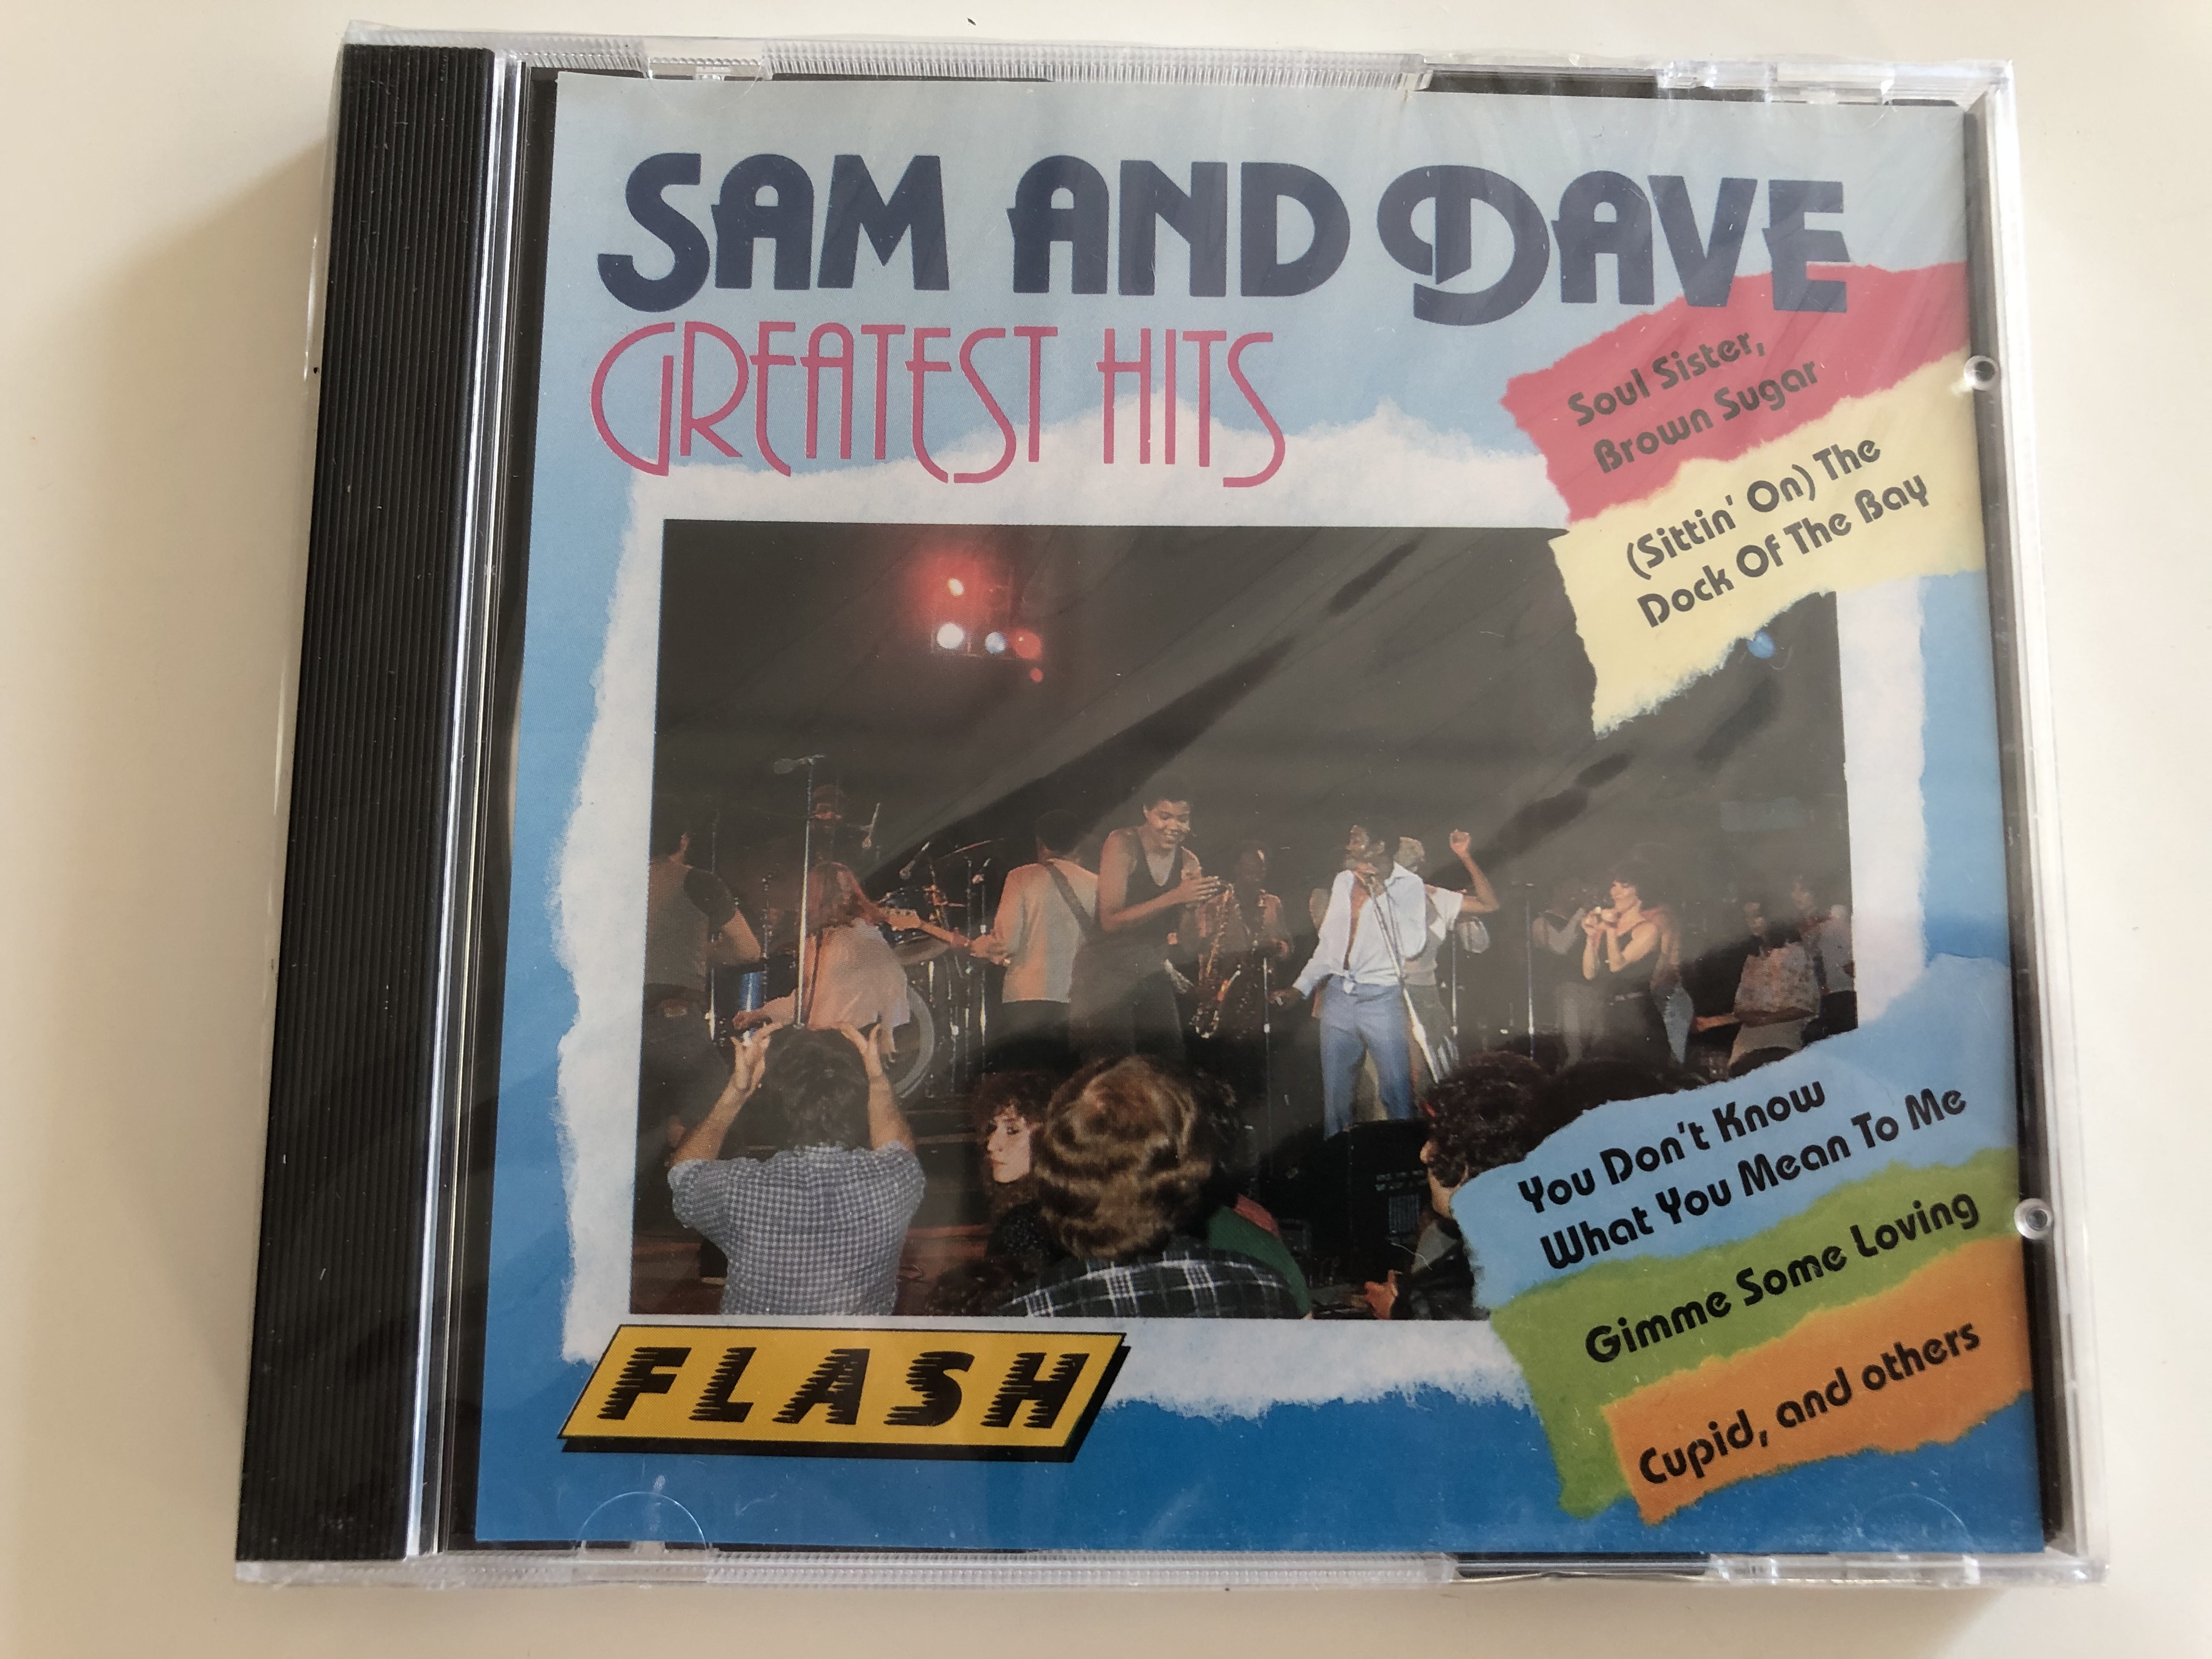 sam-and-dave-greatest-hits-soul-sister-brown-sugar-sittin-on-the-dock-of-the-bay...-you-don-t-know-what-you-mean-to-me-gimme-some-loving-cupid-and-others-flash-audio-cd-stereo-p1-st-1-.jpg